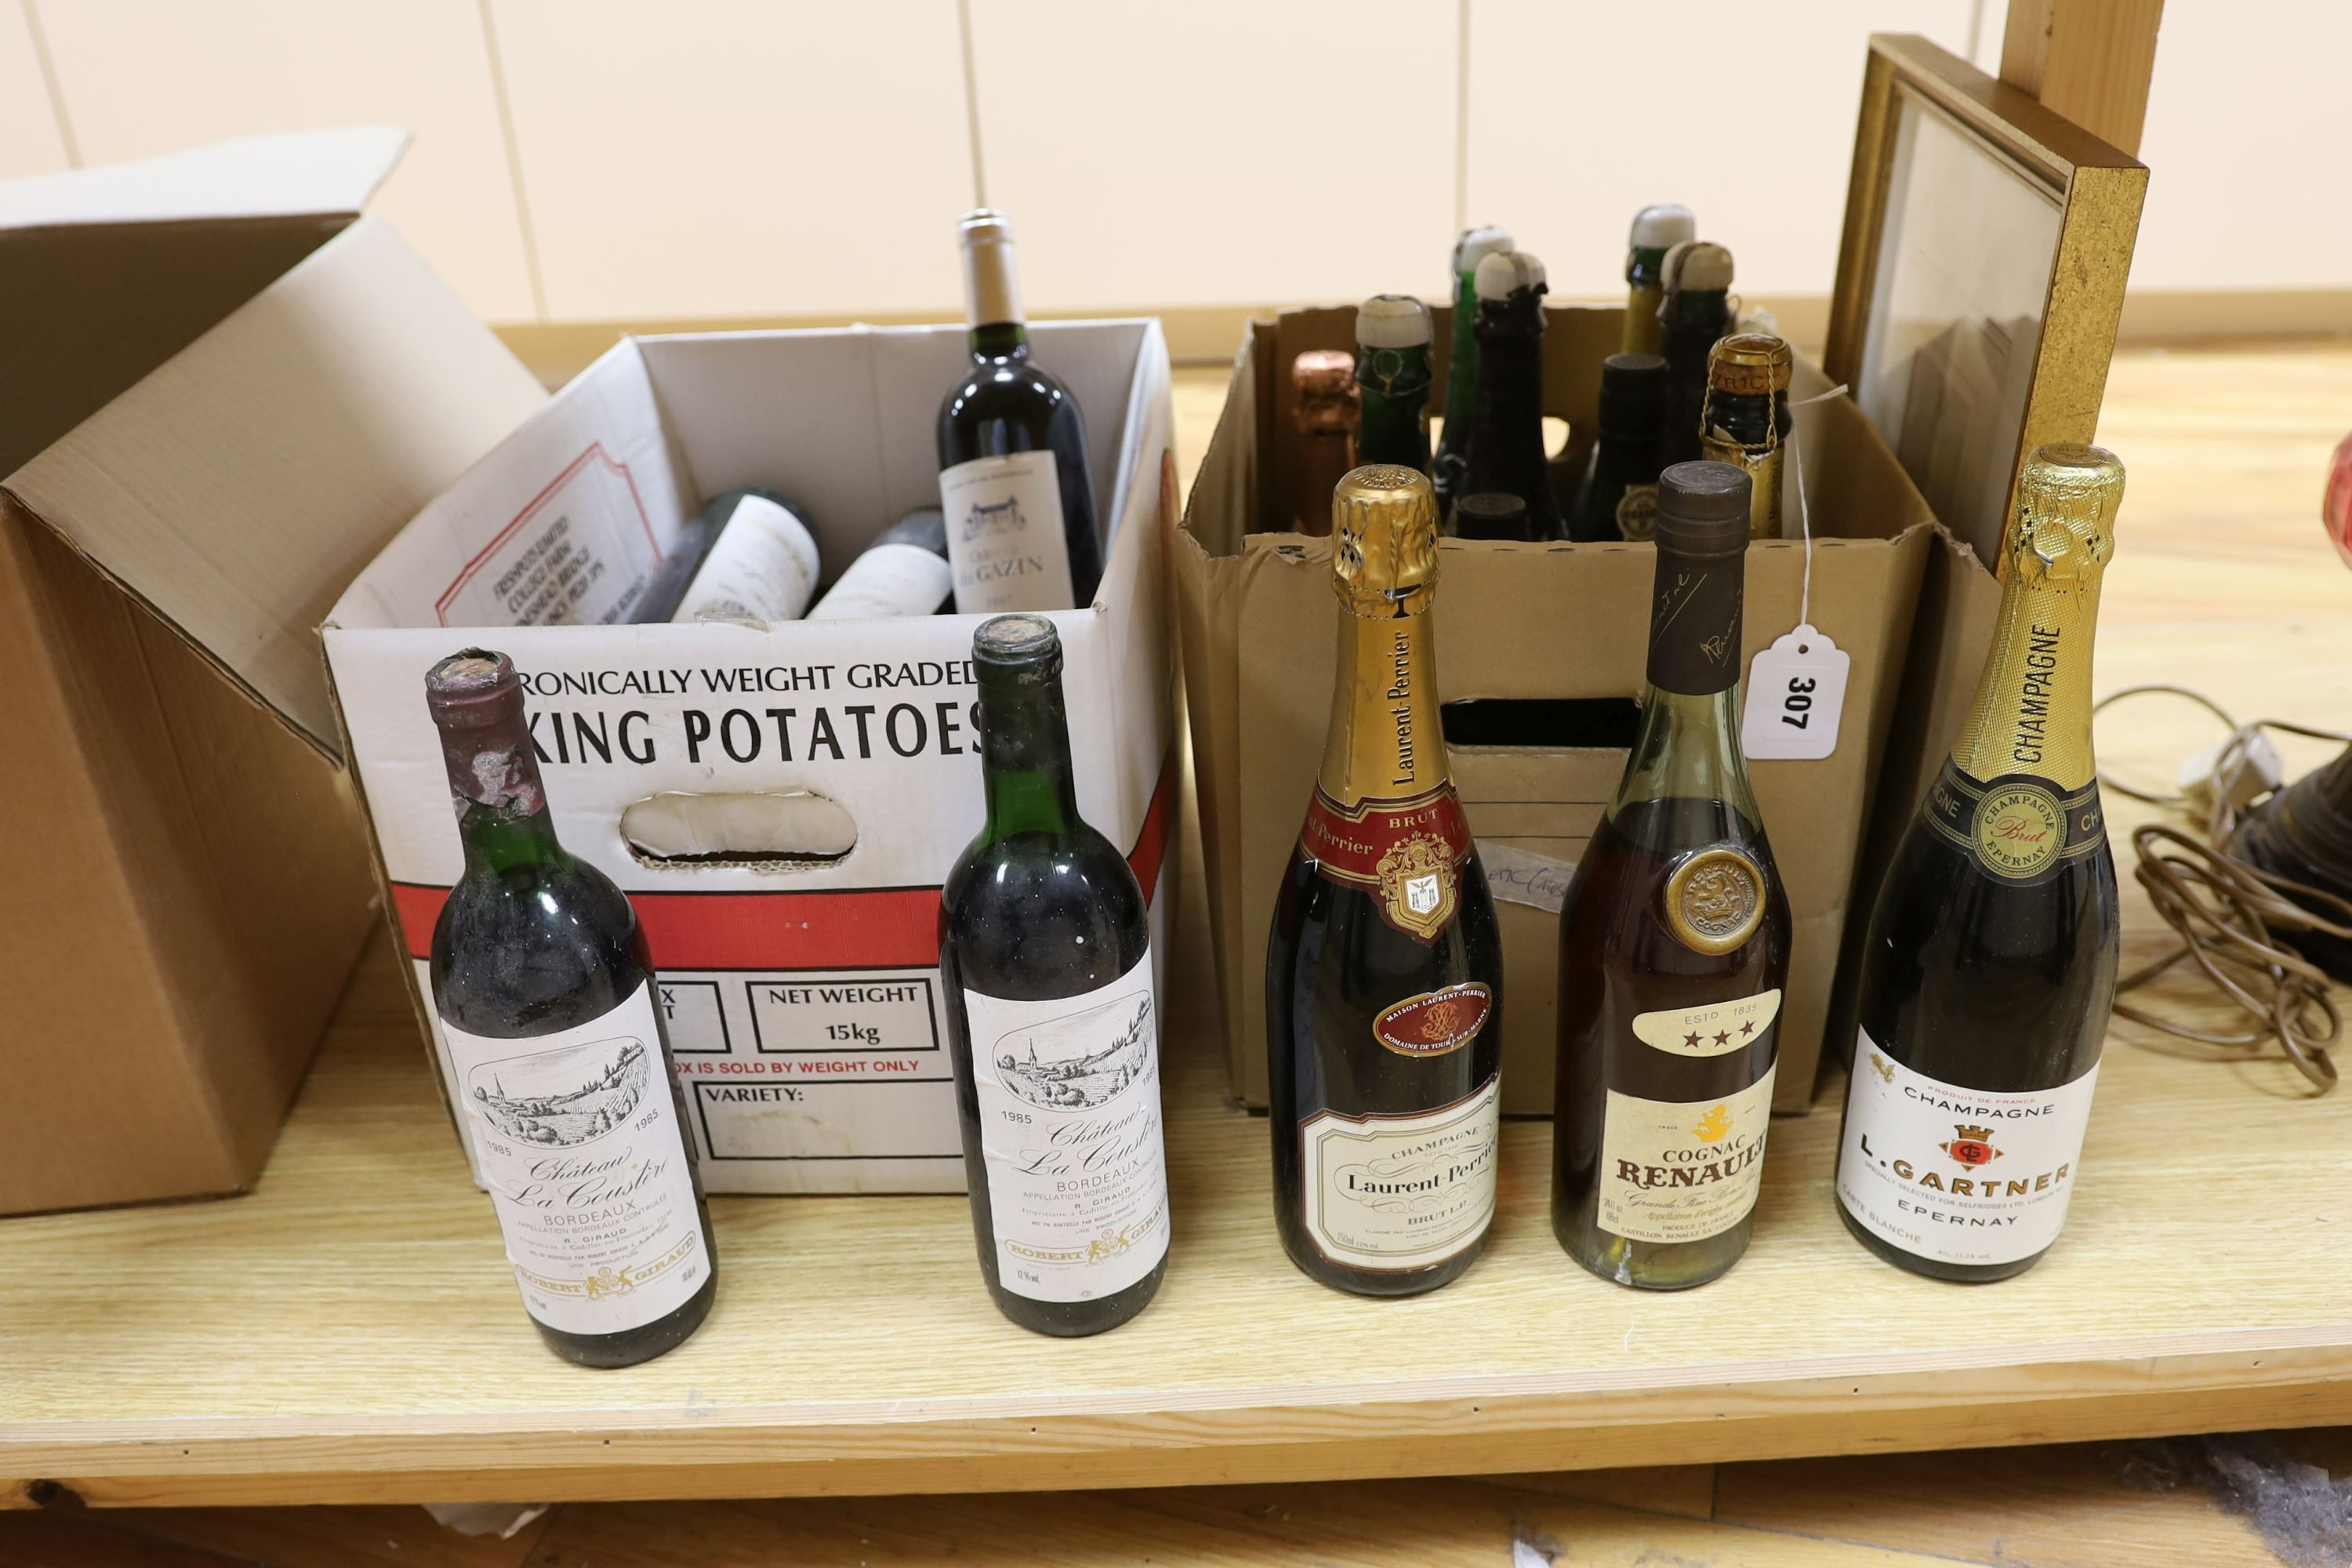 A group of wines and champagnes including Chateau La Coustere, Laurent-Perrier, L.Gardner and a bottle of Renault cognac